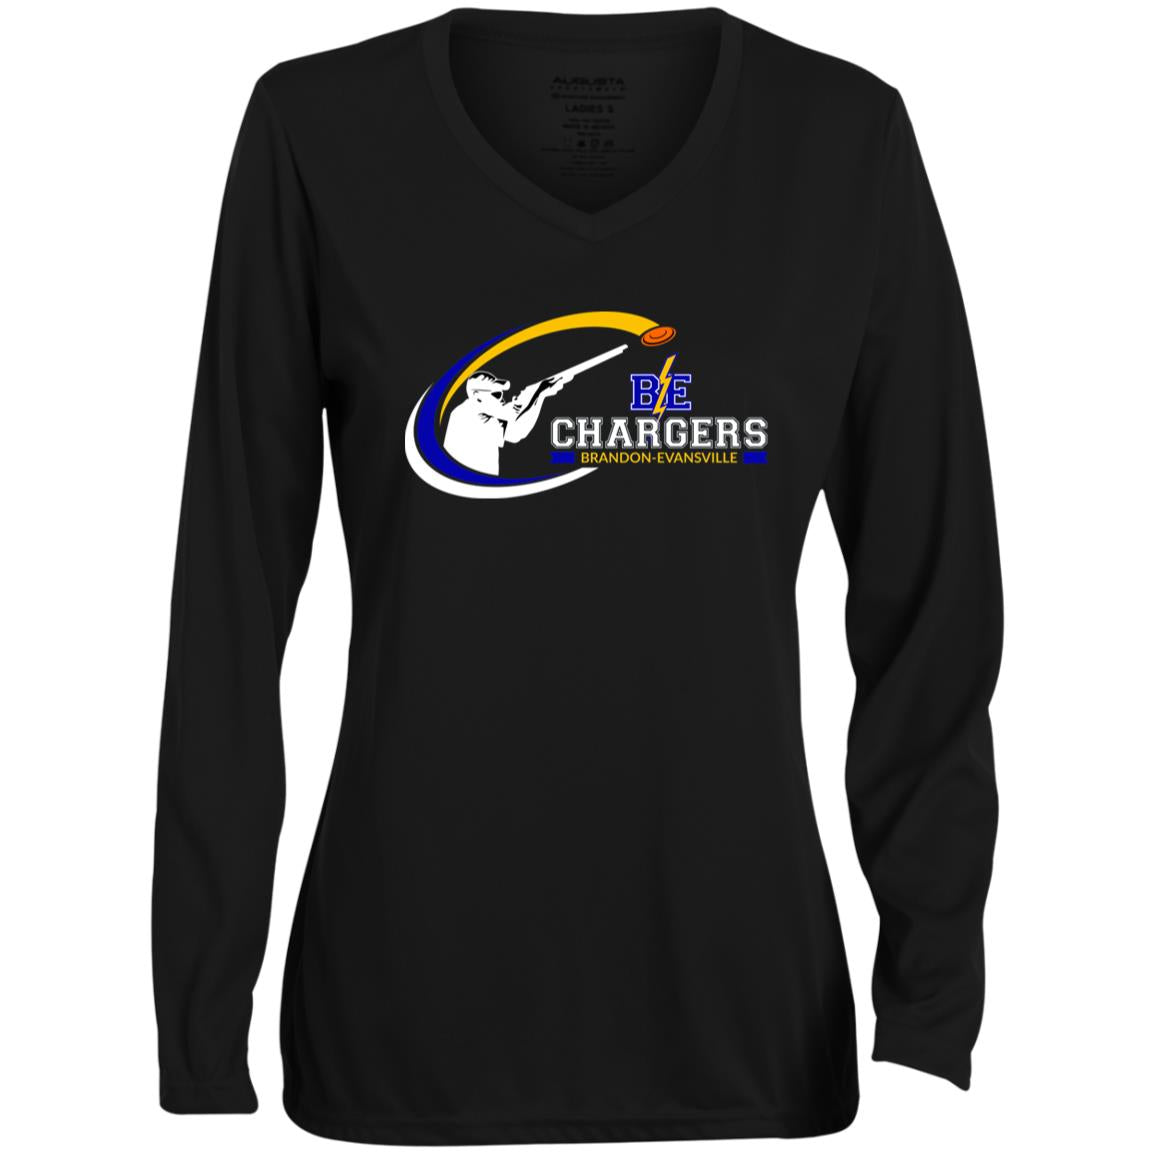 Chargers Trapshooting - Ladies' Moisture-Wicking Long Sleeve V-Neck Tee